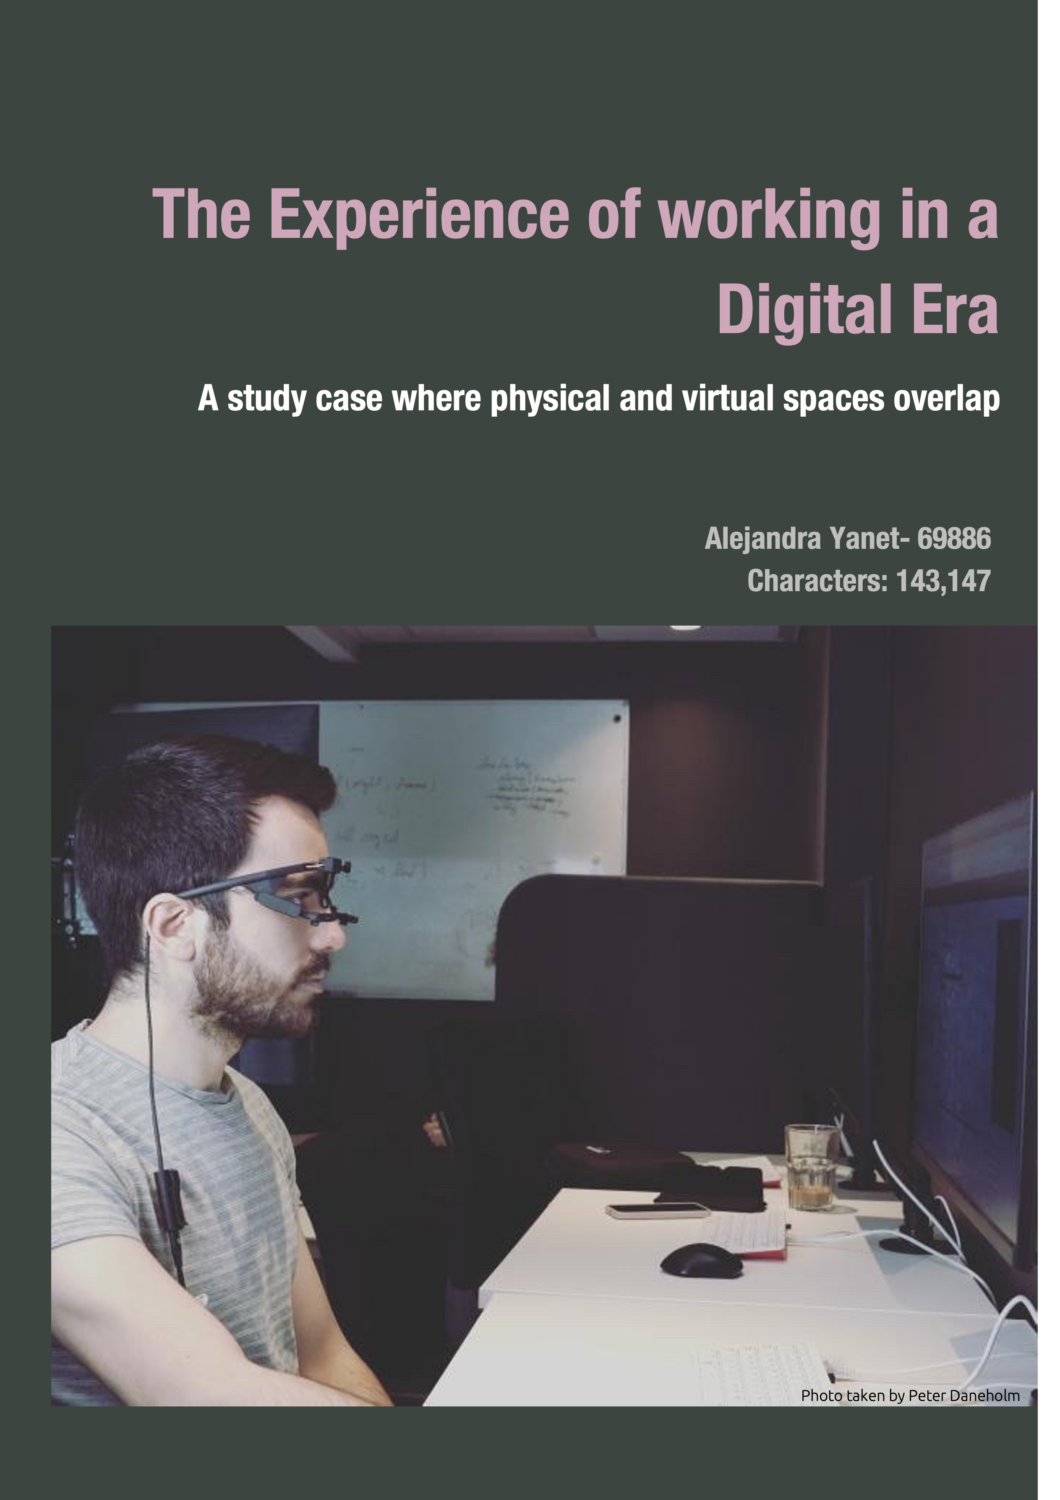 The Experience of working in a digital